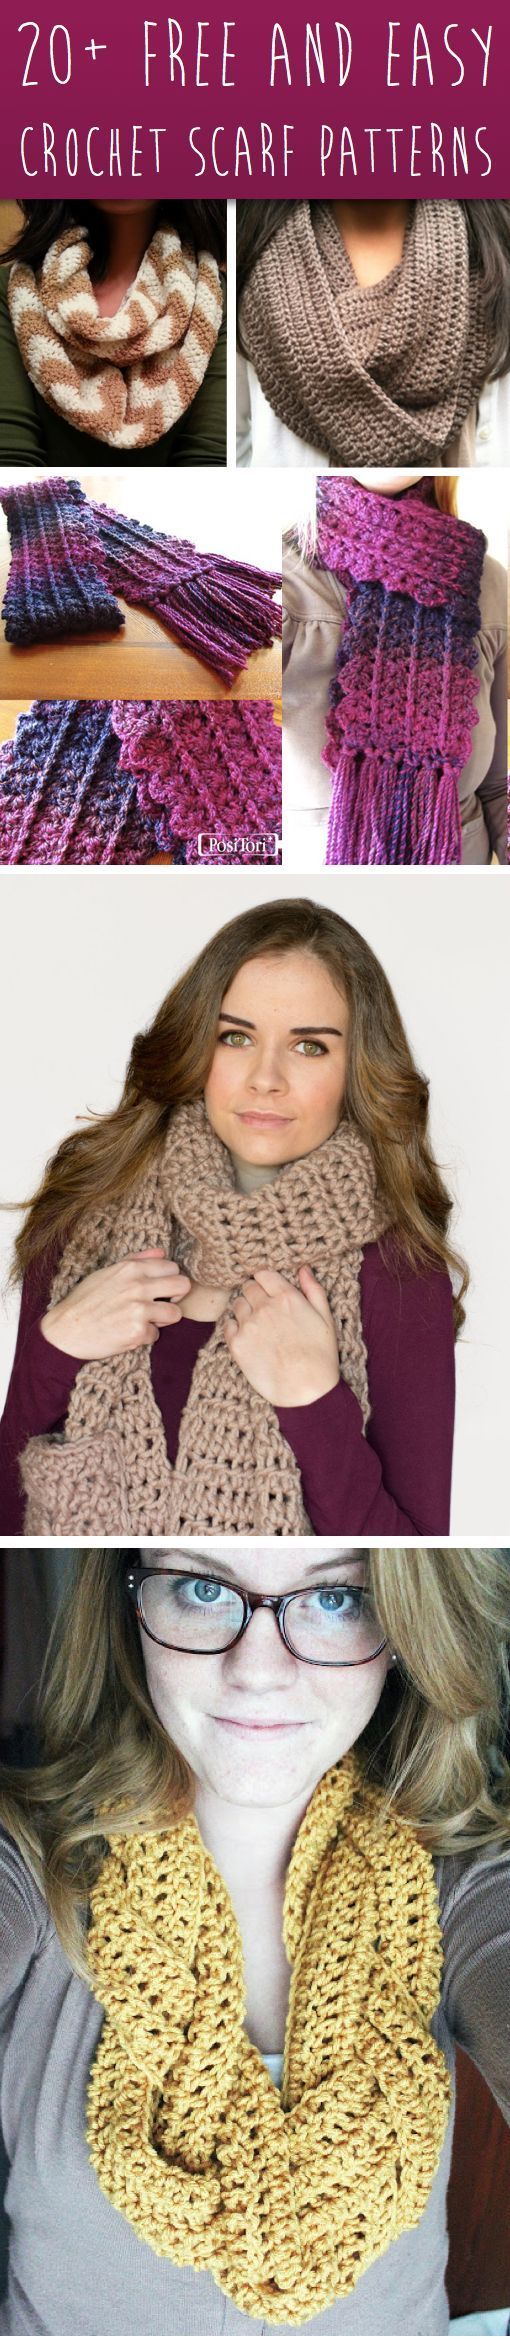 1576277246_105_These-20-Free-and-Easy-Crochet-Scarf-Patterns-Will-Blow.jpg